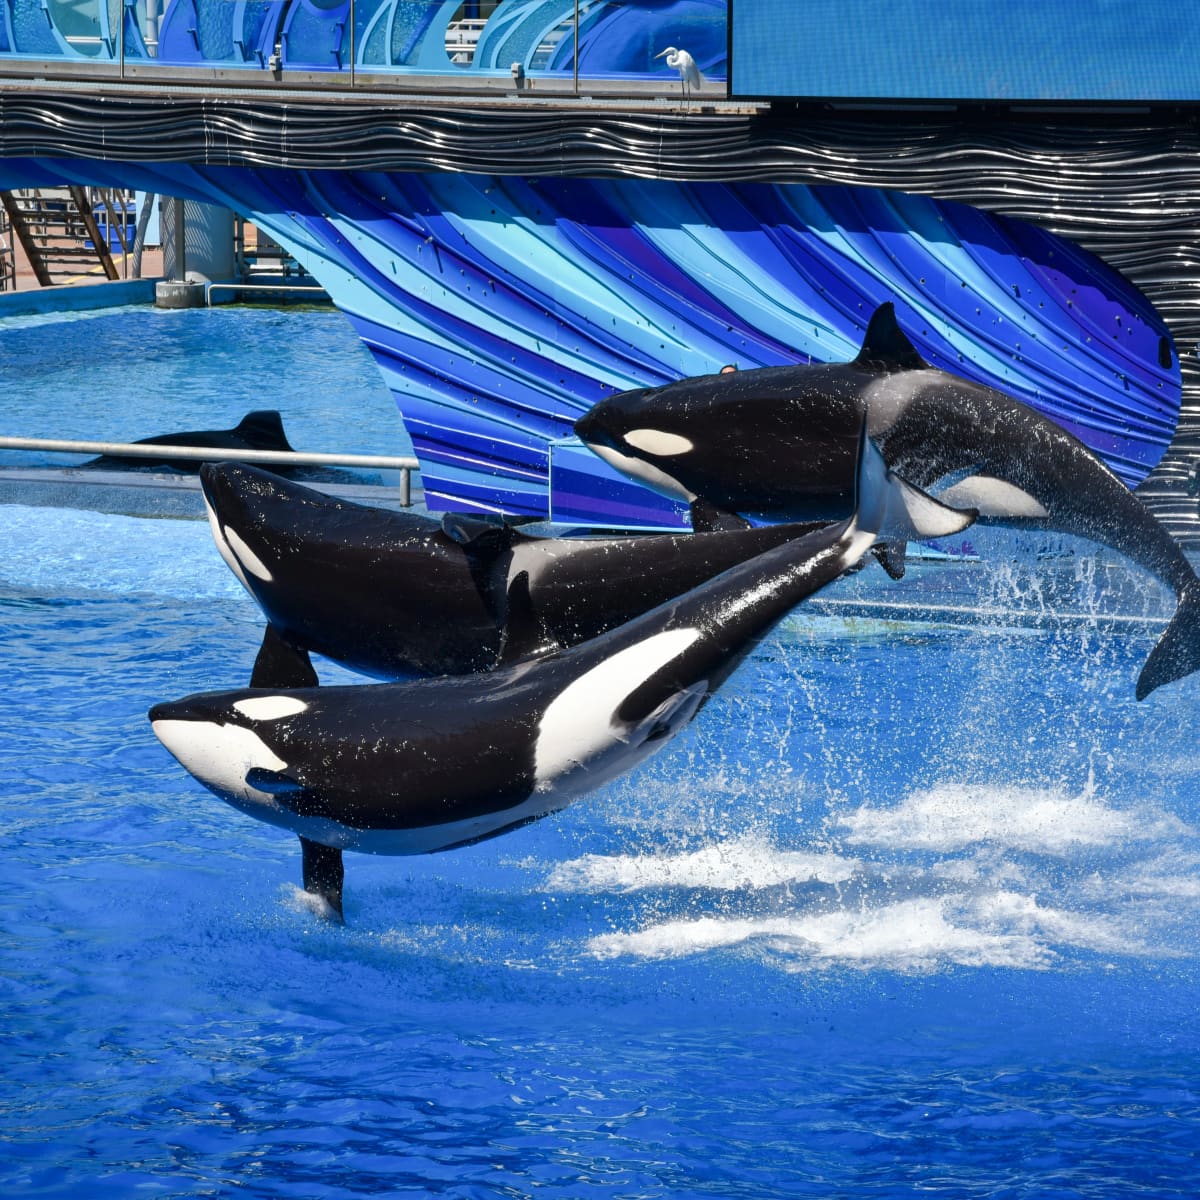 10 Facts About Killer Whales (Orca) - Owlcation